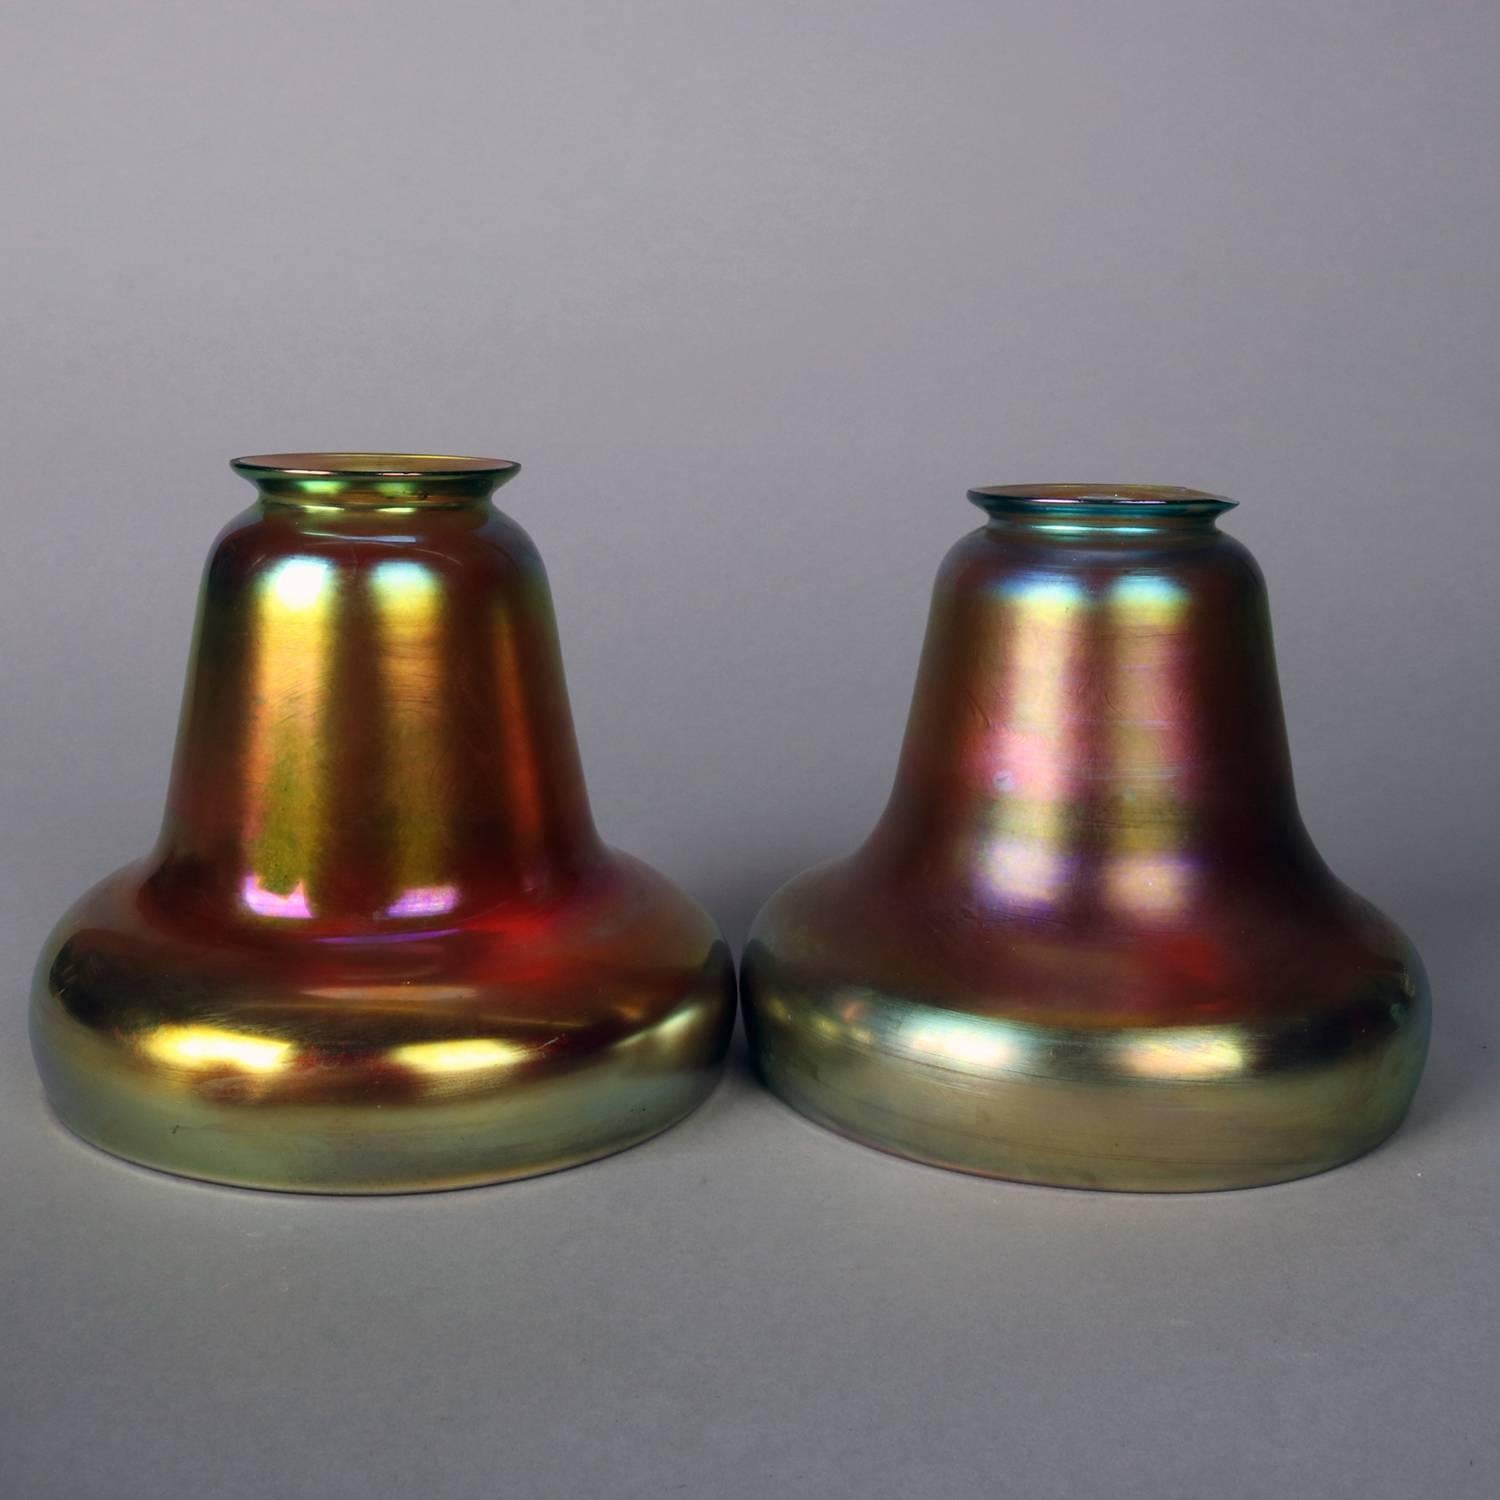 Pair of Arts & Crafts gold aurene bell form art glass light shades by Steuben, signed, 20th century.

Measure: 5.5